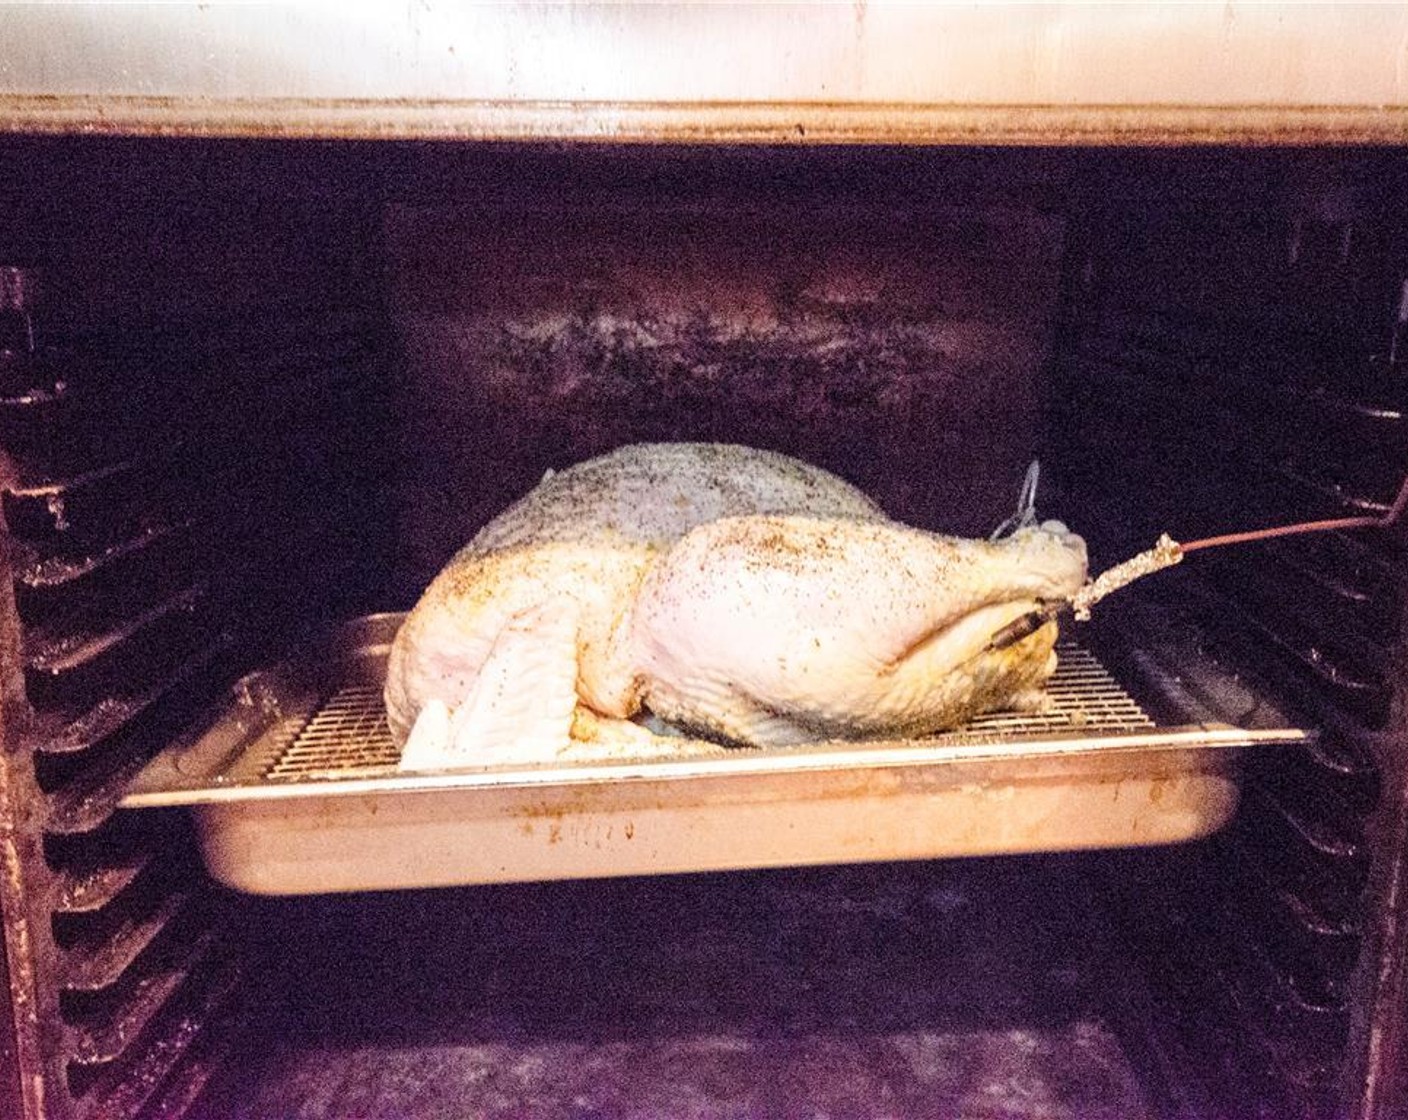 step 7 Place the bag under the grates, but not directly on the fire. Replace the grates. Place the turkey on the grill, breast side up. Close the lid, and smoke for 1 hour. It's important to maintain a temperature of 275-300 degrees F (140-150 degrees C) -don't open the lid.